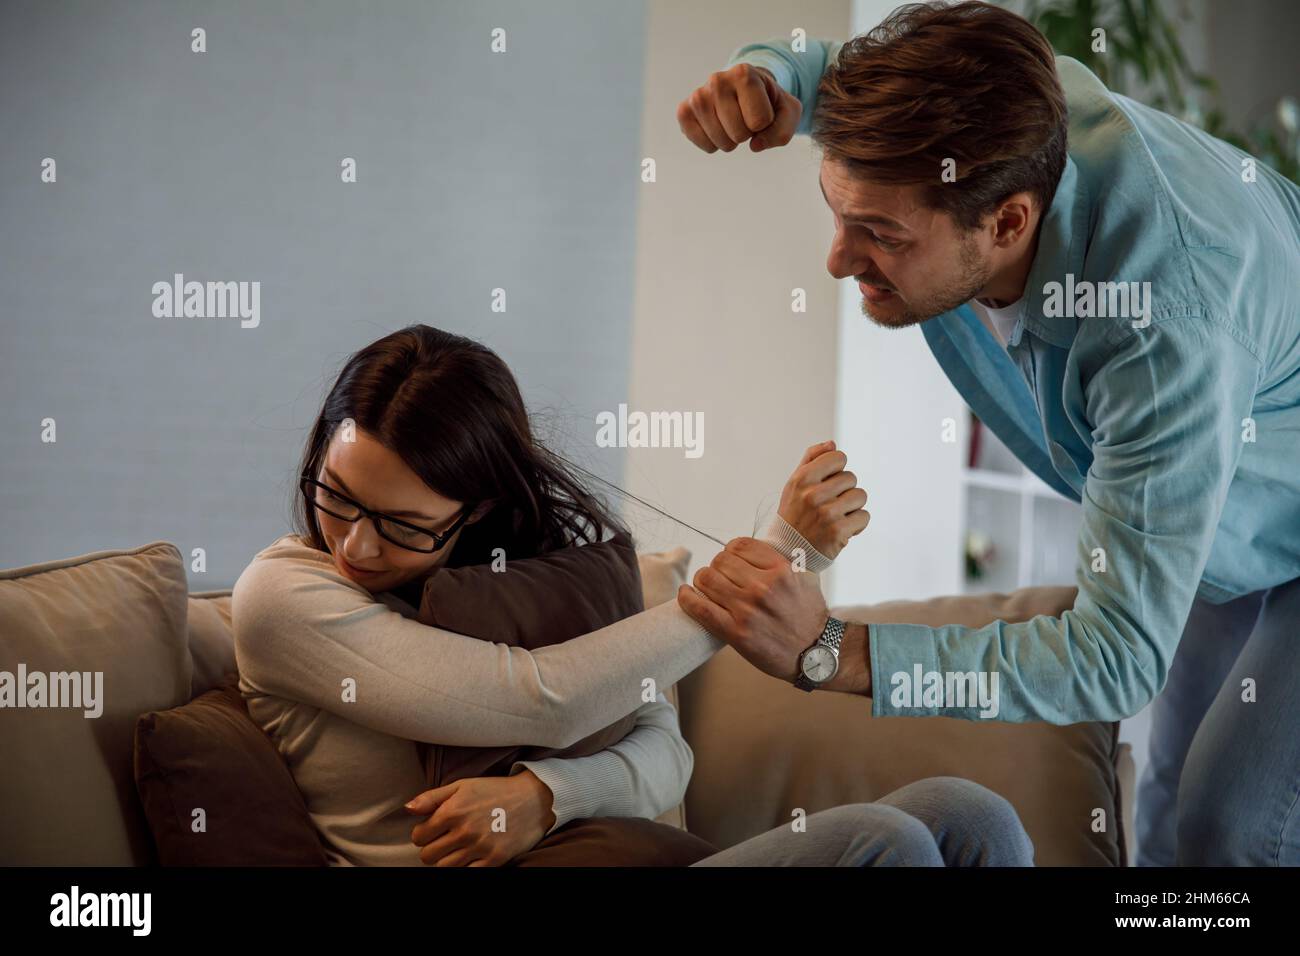 Angry man and woman in fear of domestic abuse Stock Photo